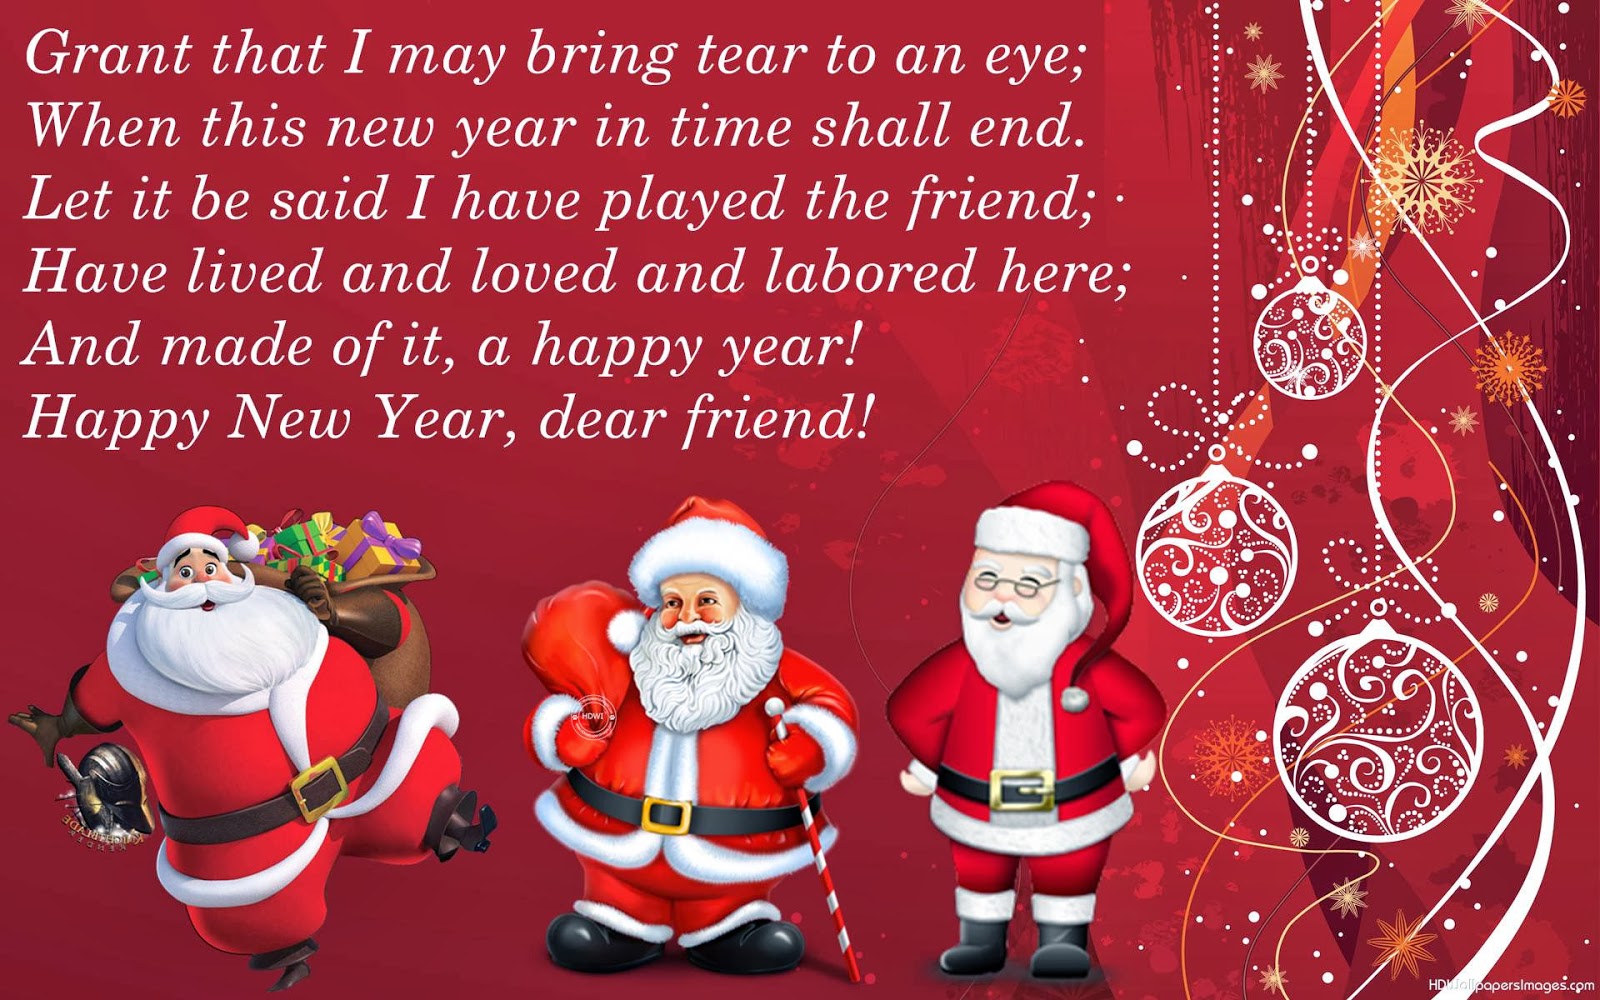 a message from santa claus special